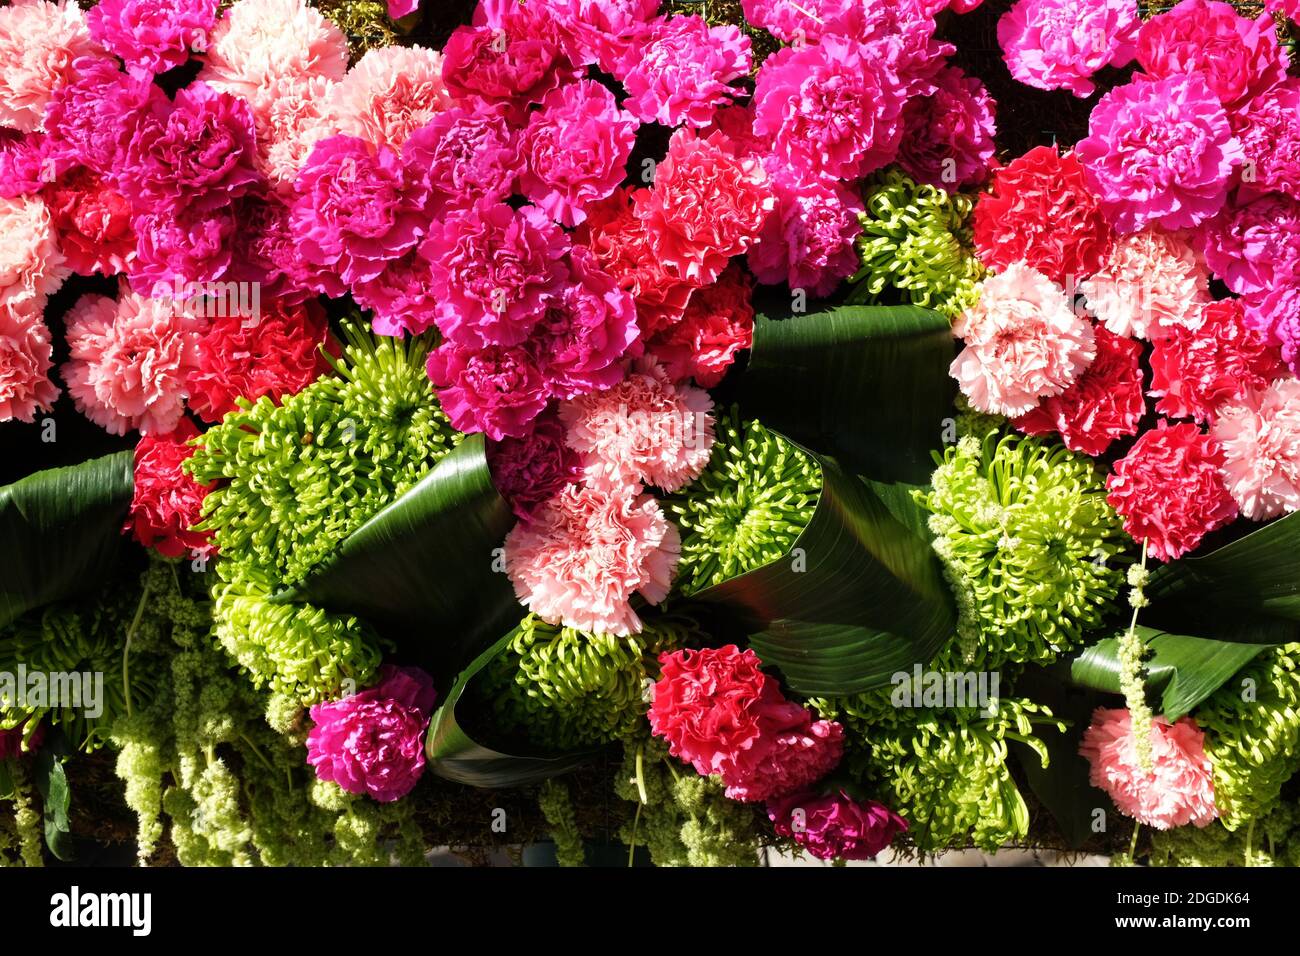 Background of red and pink carnations Stock Photo